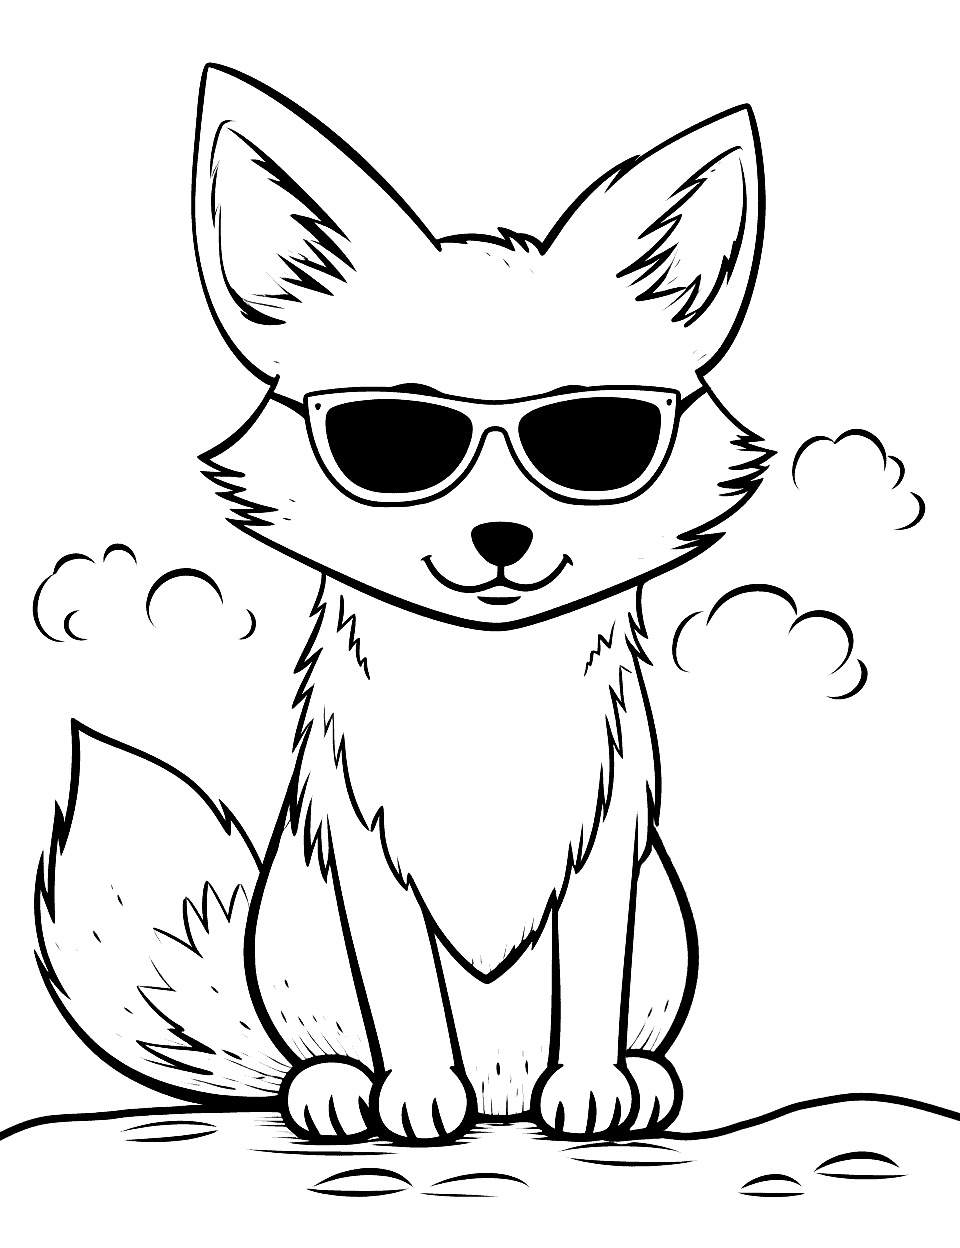 Cool Fox With Sunglasses Coloring Page - A fox chilling in the summer sun, with sleek shades and a fun vibe.